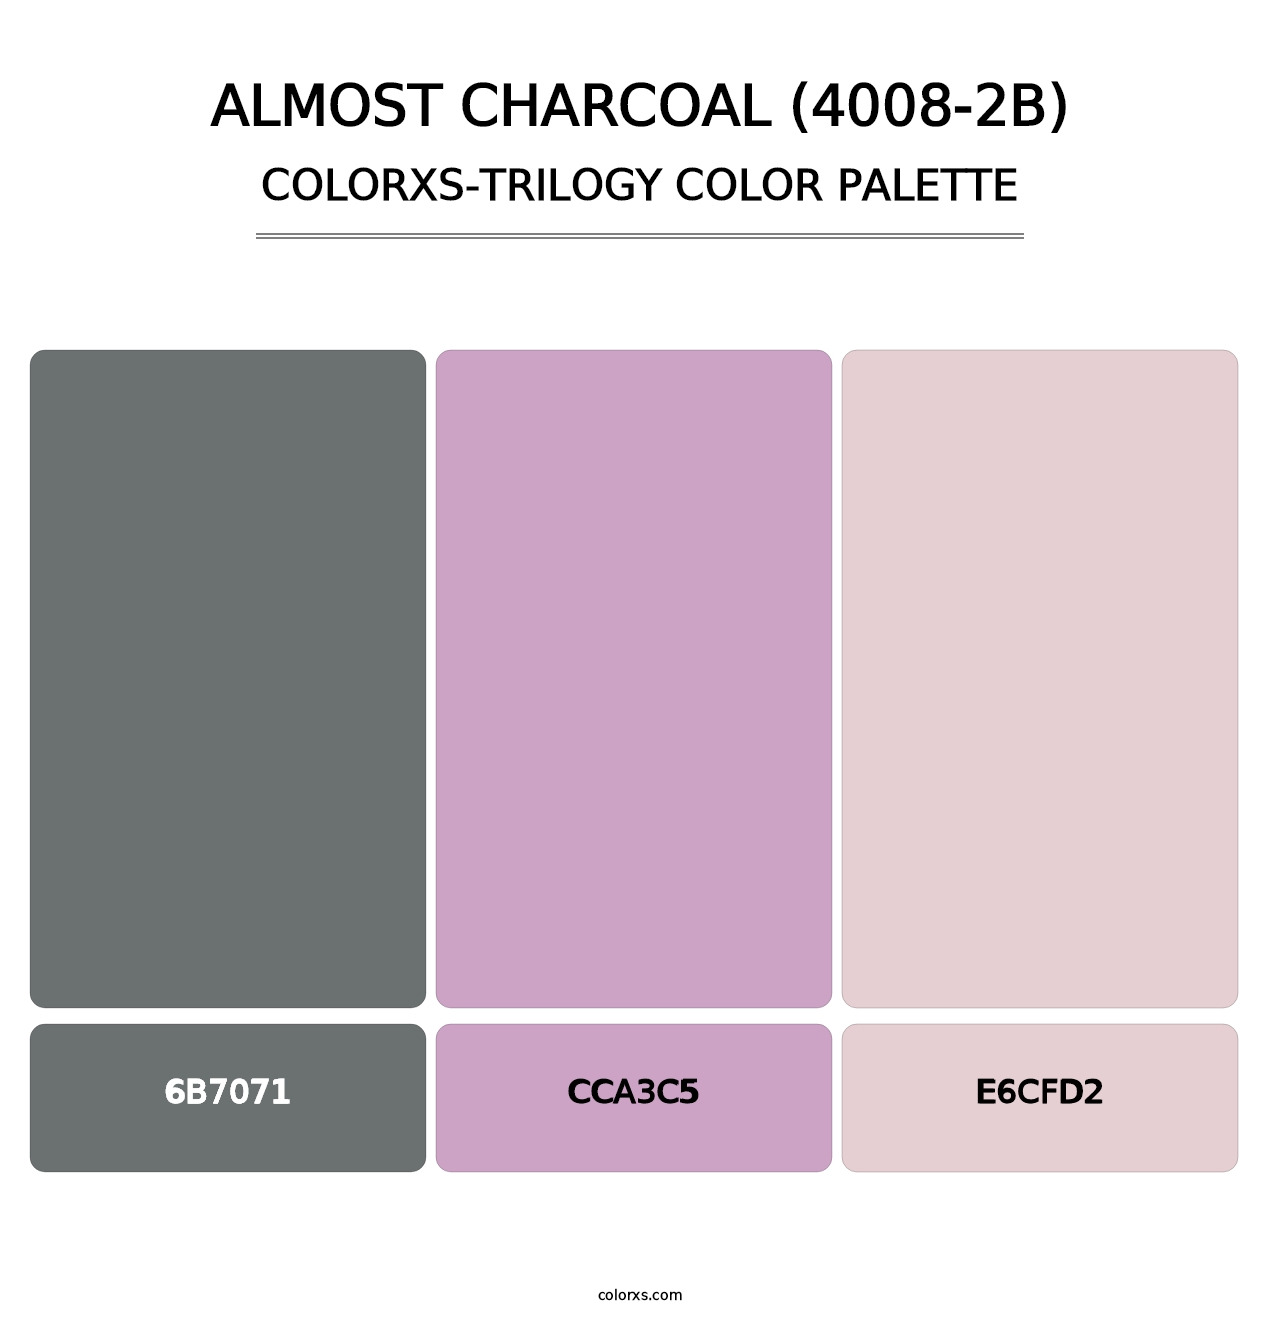 Almost Charcoal (4008-2B) - Colorxs Trilogy Palette